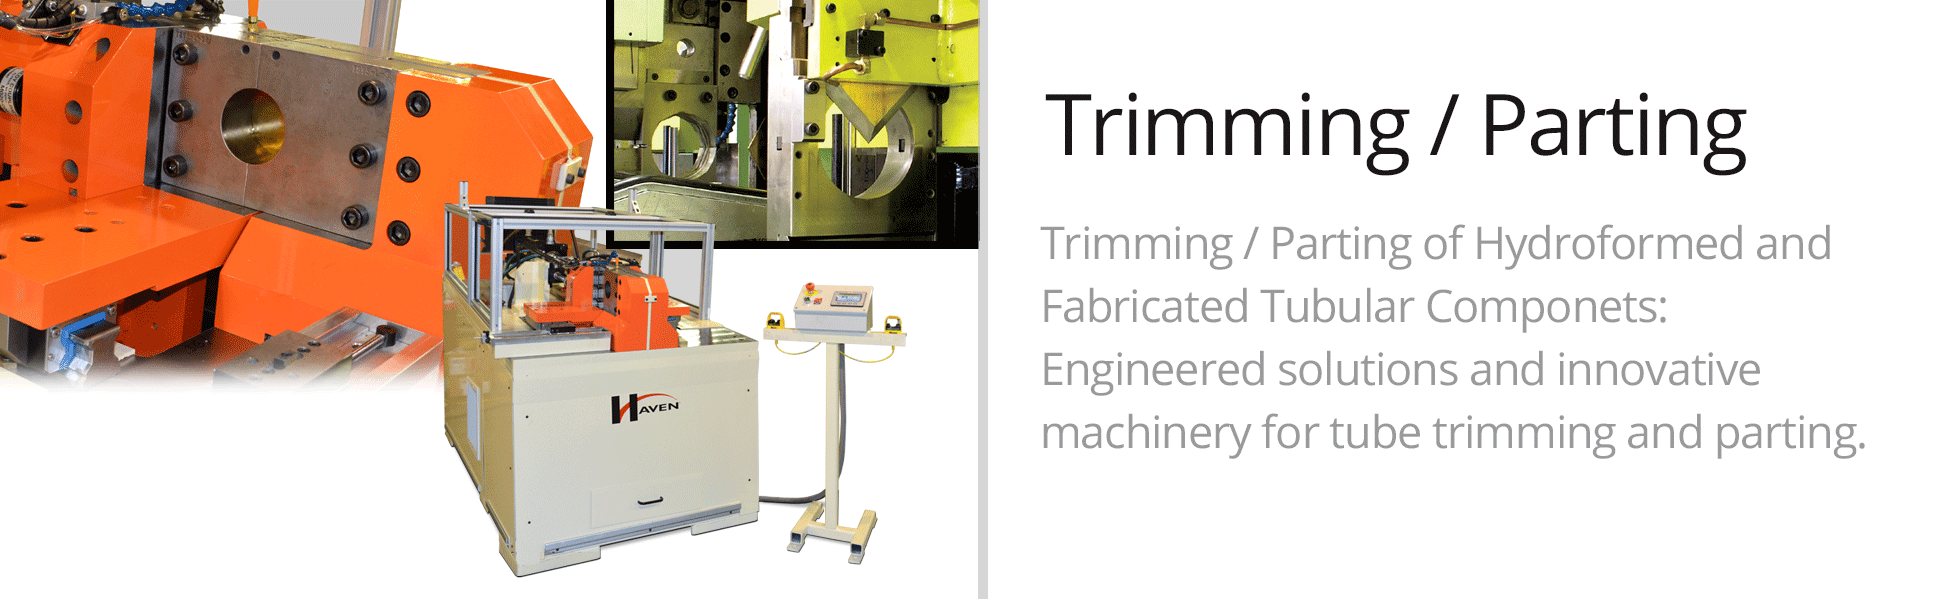 Haven Trim Machine Provides Fast, Low Cost Solution - Video